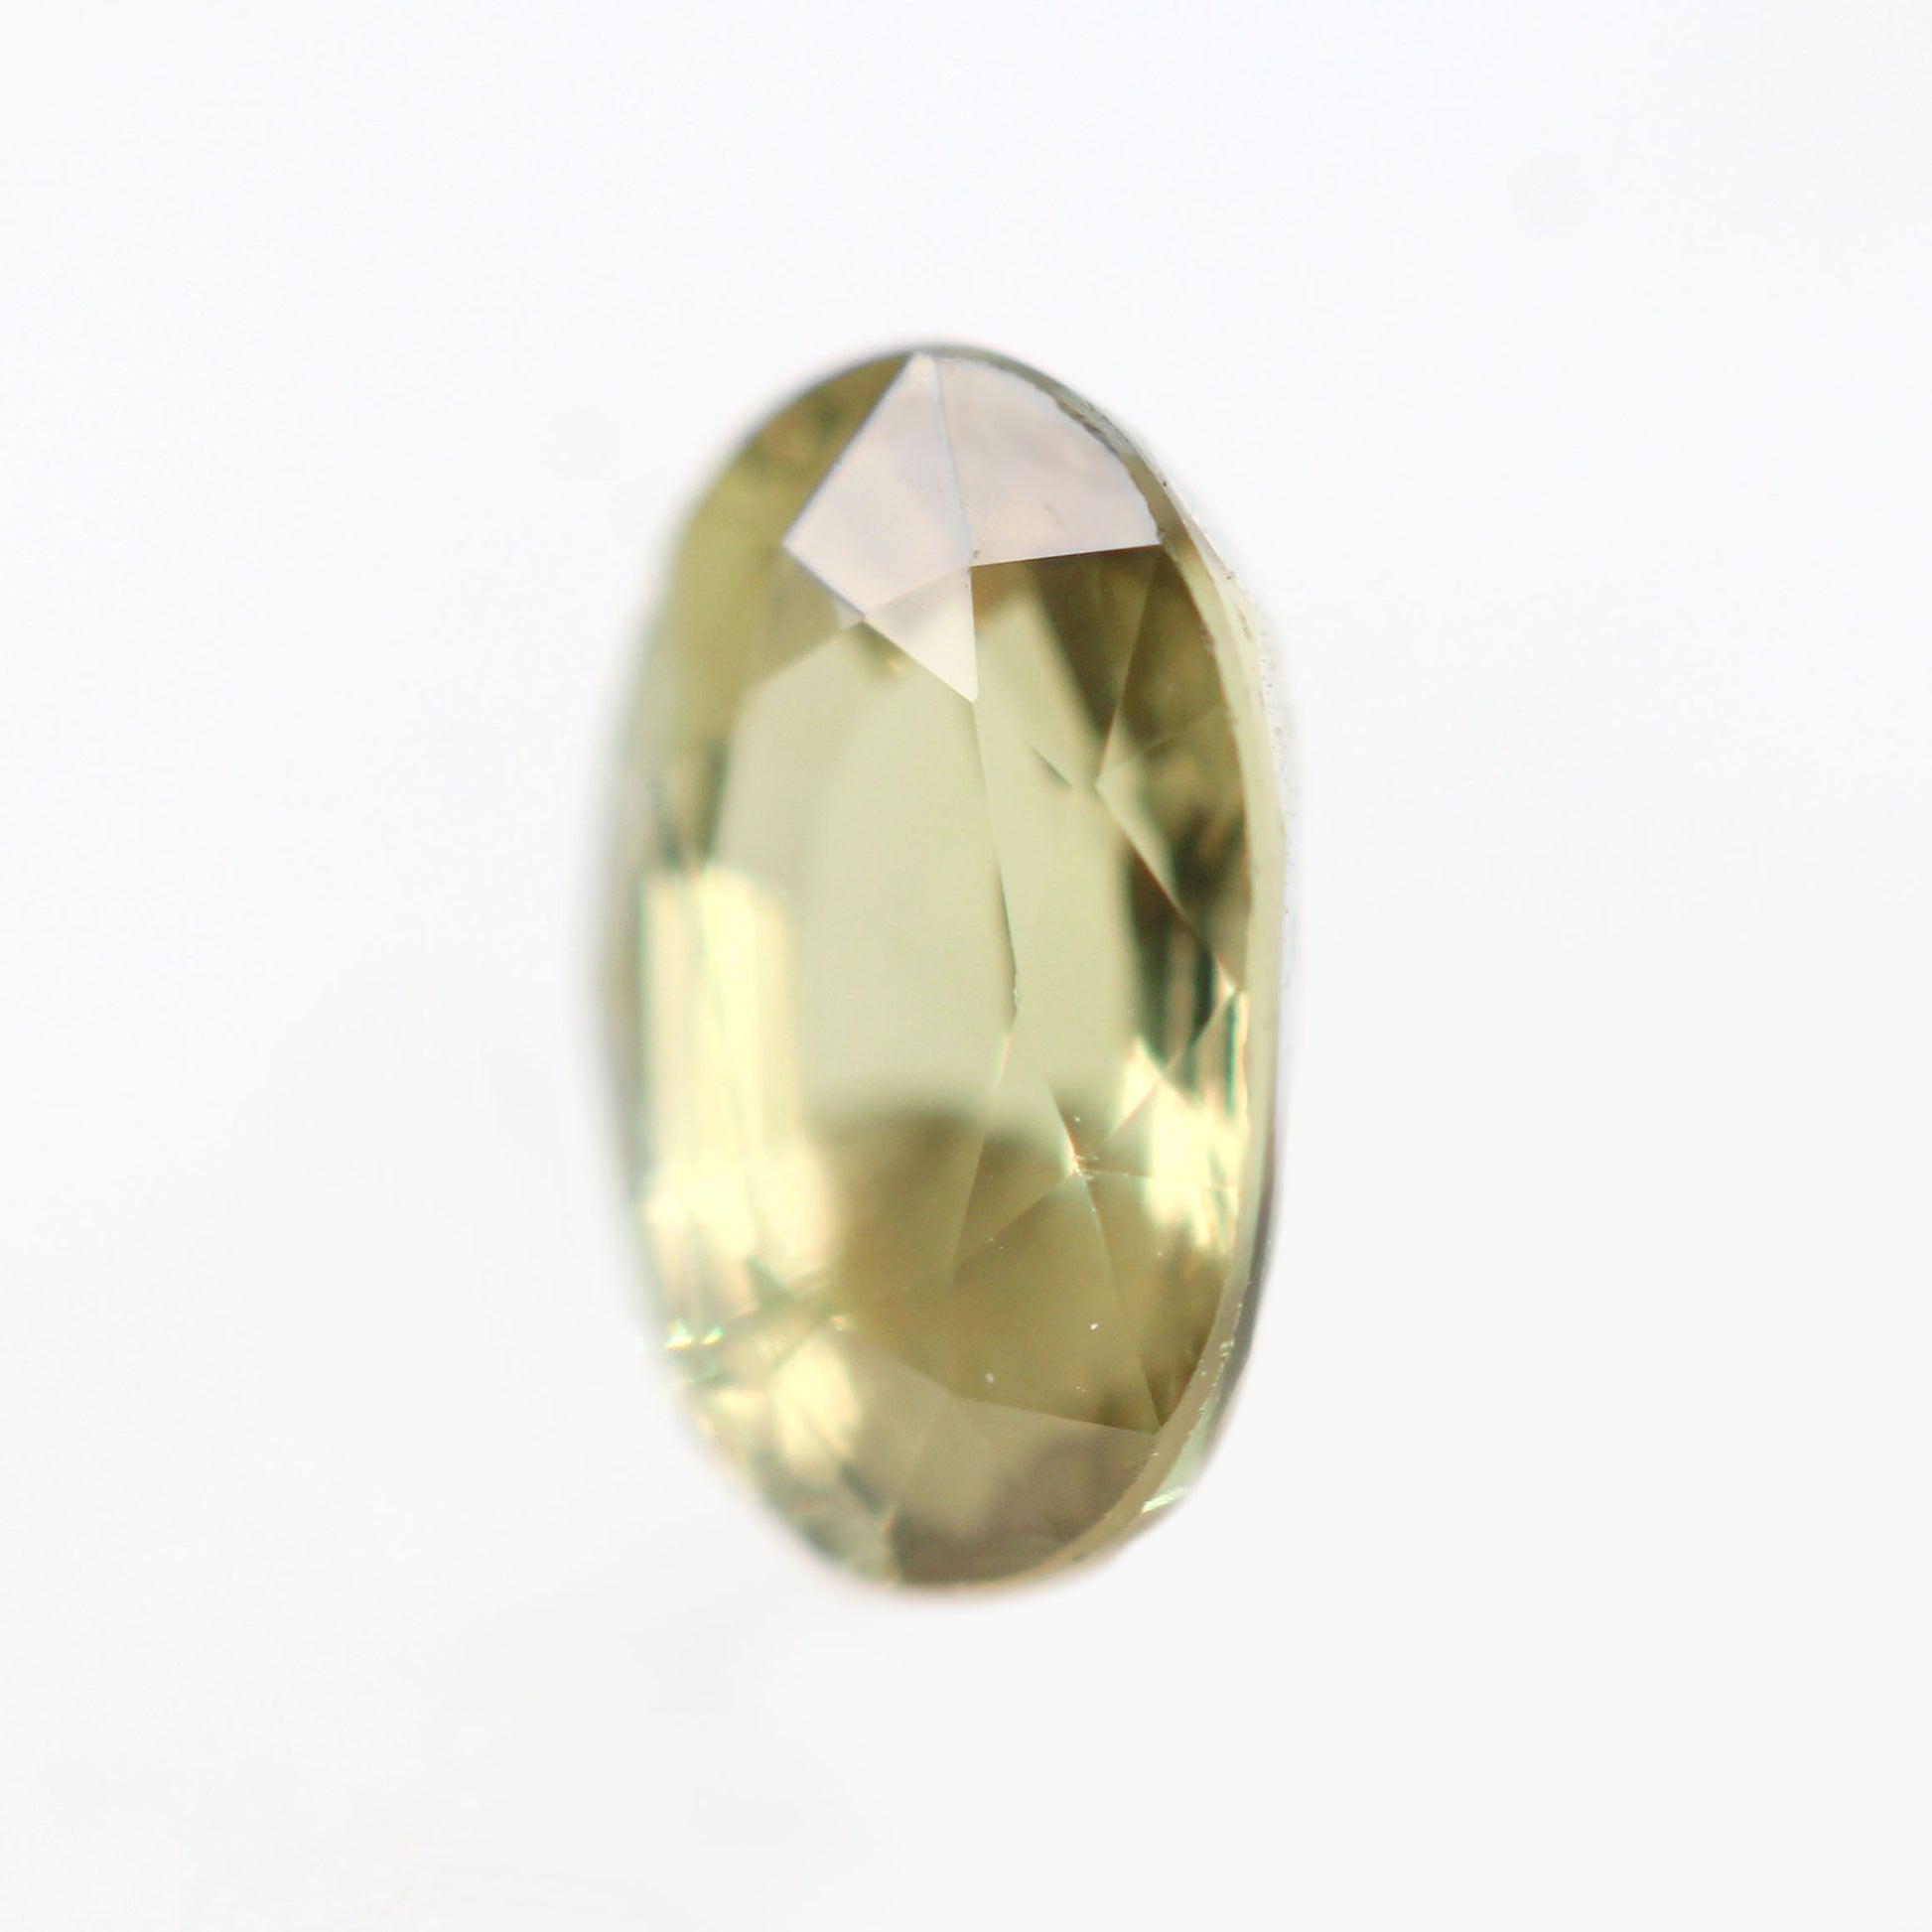 0.97 Carat GIA Certified Color-Change Yellow Green Oval Chrysoberyl Alexandrite for Custom Work - Inventory Code YGAO097 - Midwinter Co. Alternative Bridal Rings and Modern Fine Jewelry